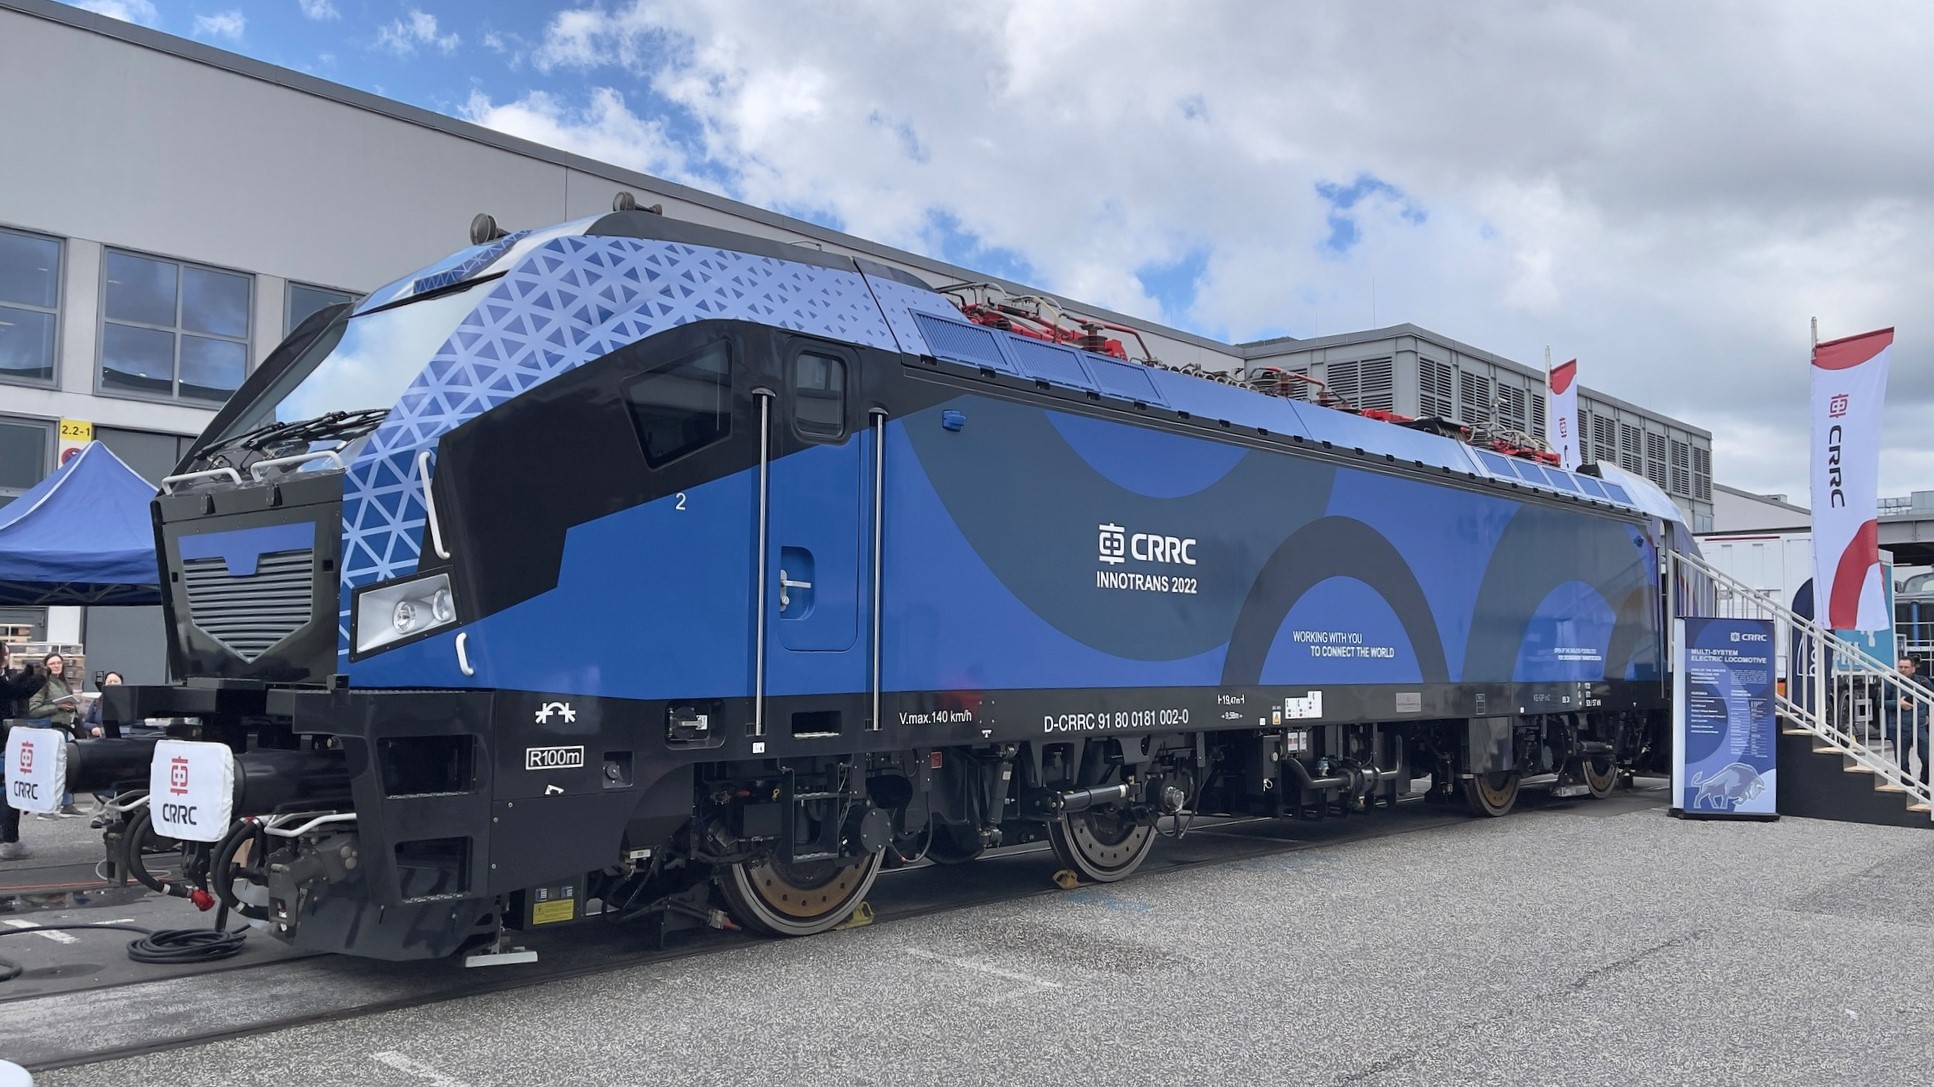 A prototype of Bison mainline DC electric locomotive by CRRC